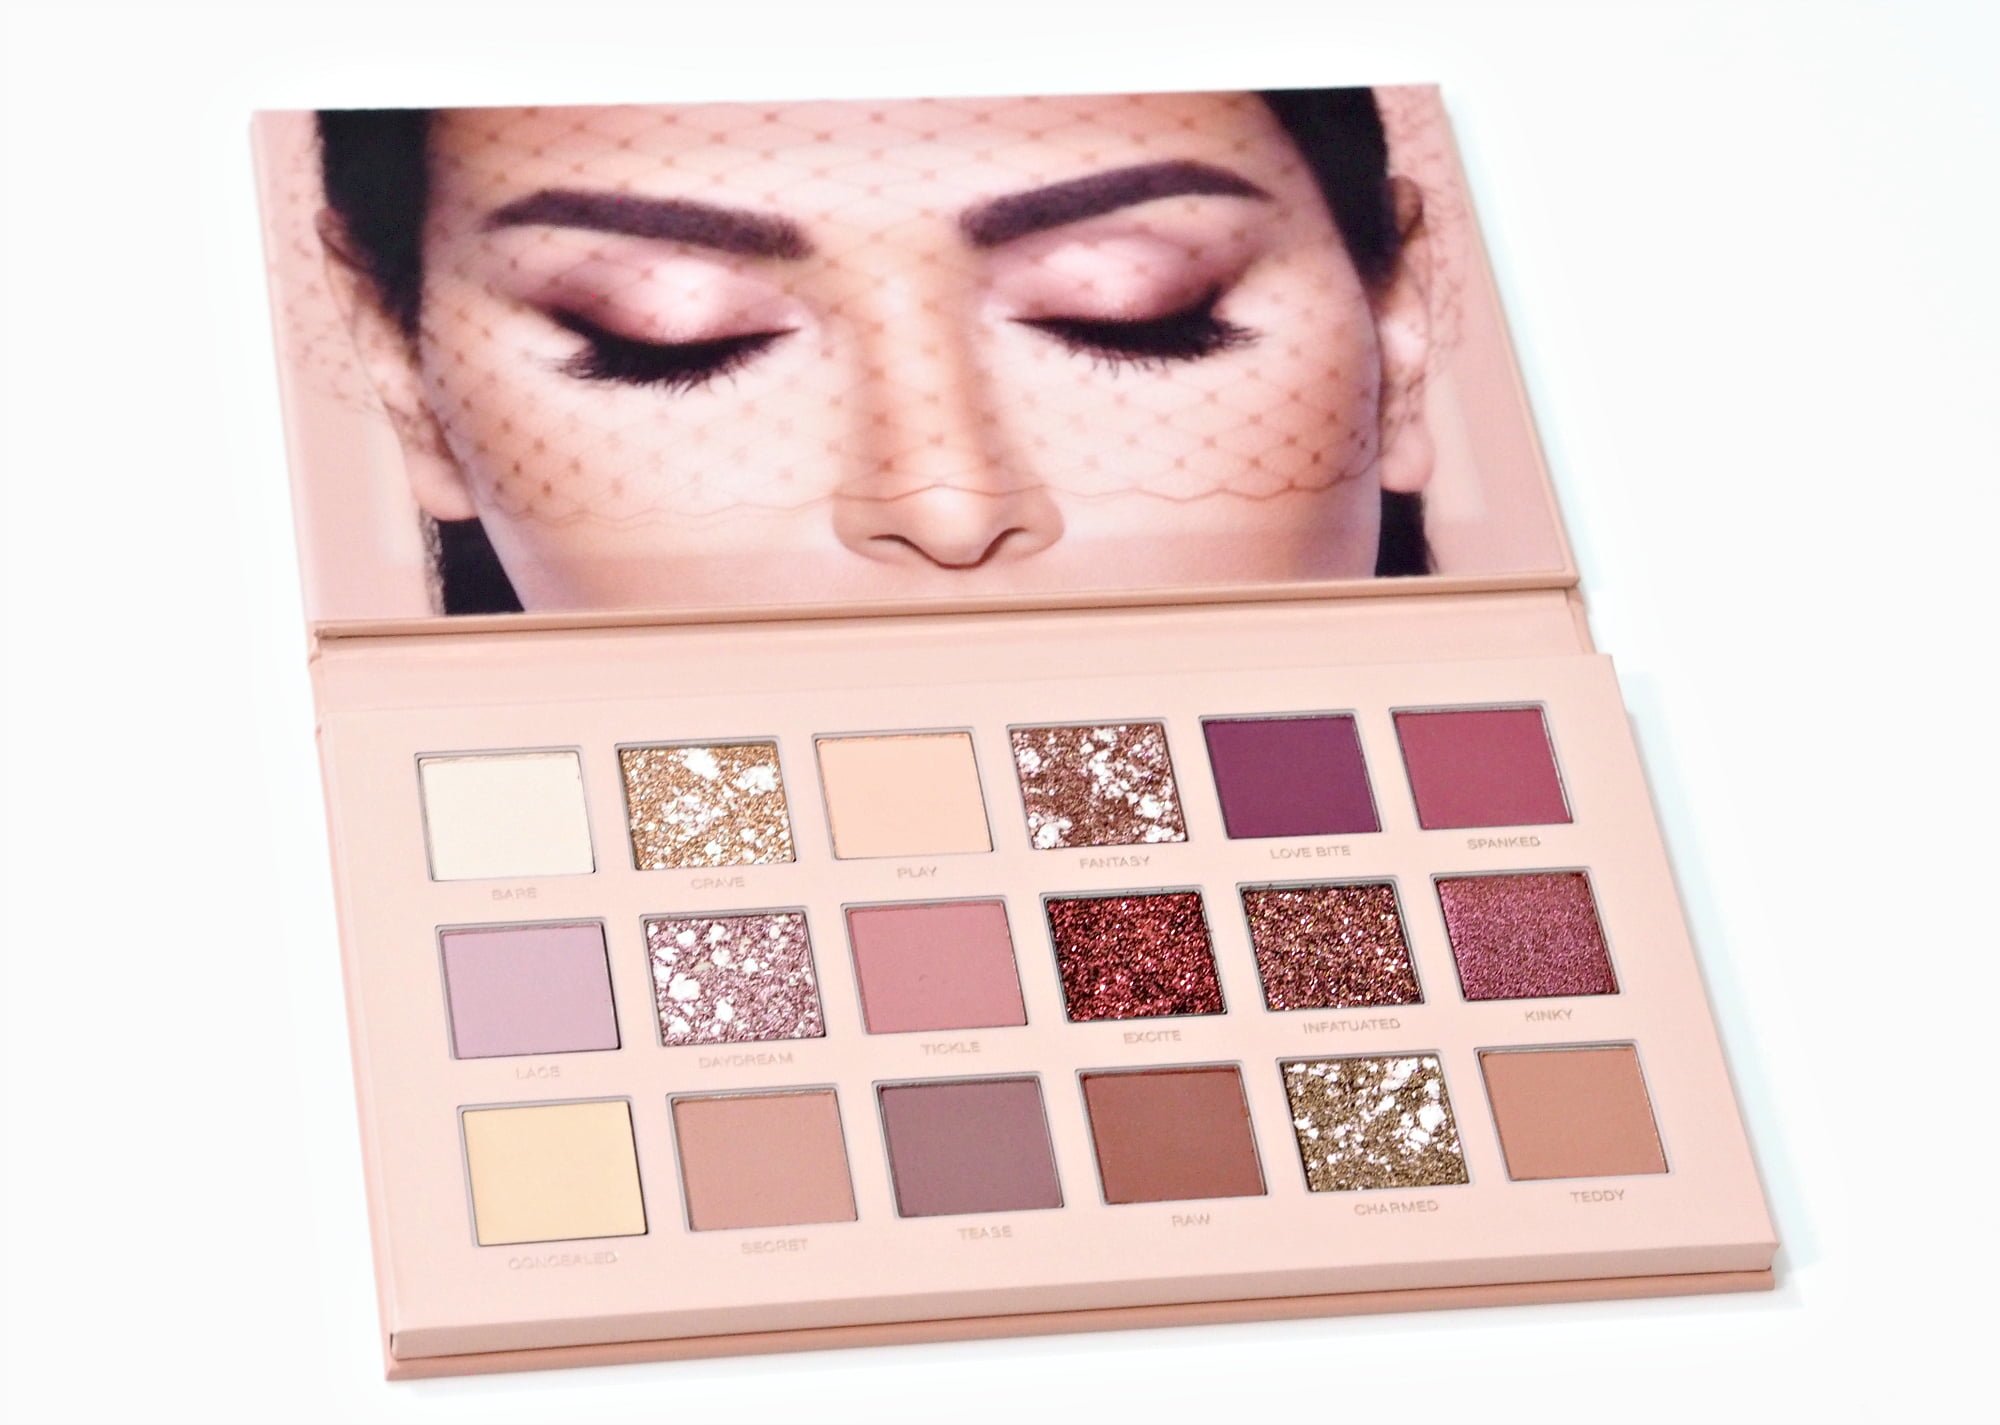 Huda Beauty The New Nude Eyeshadow Palette Review + Swatches